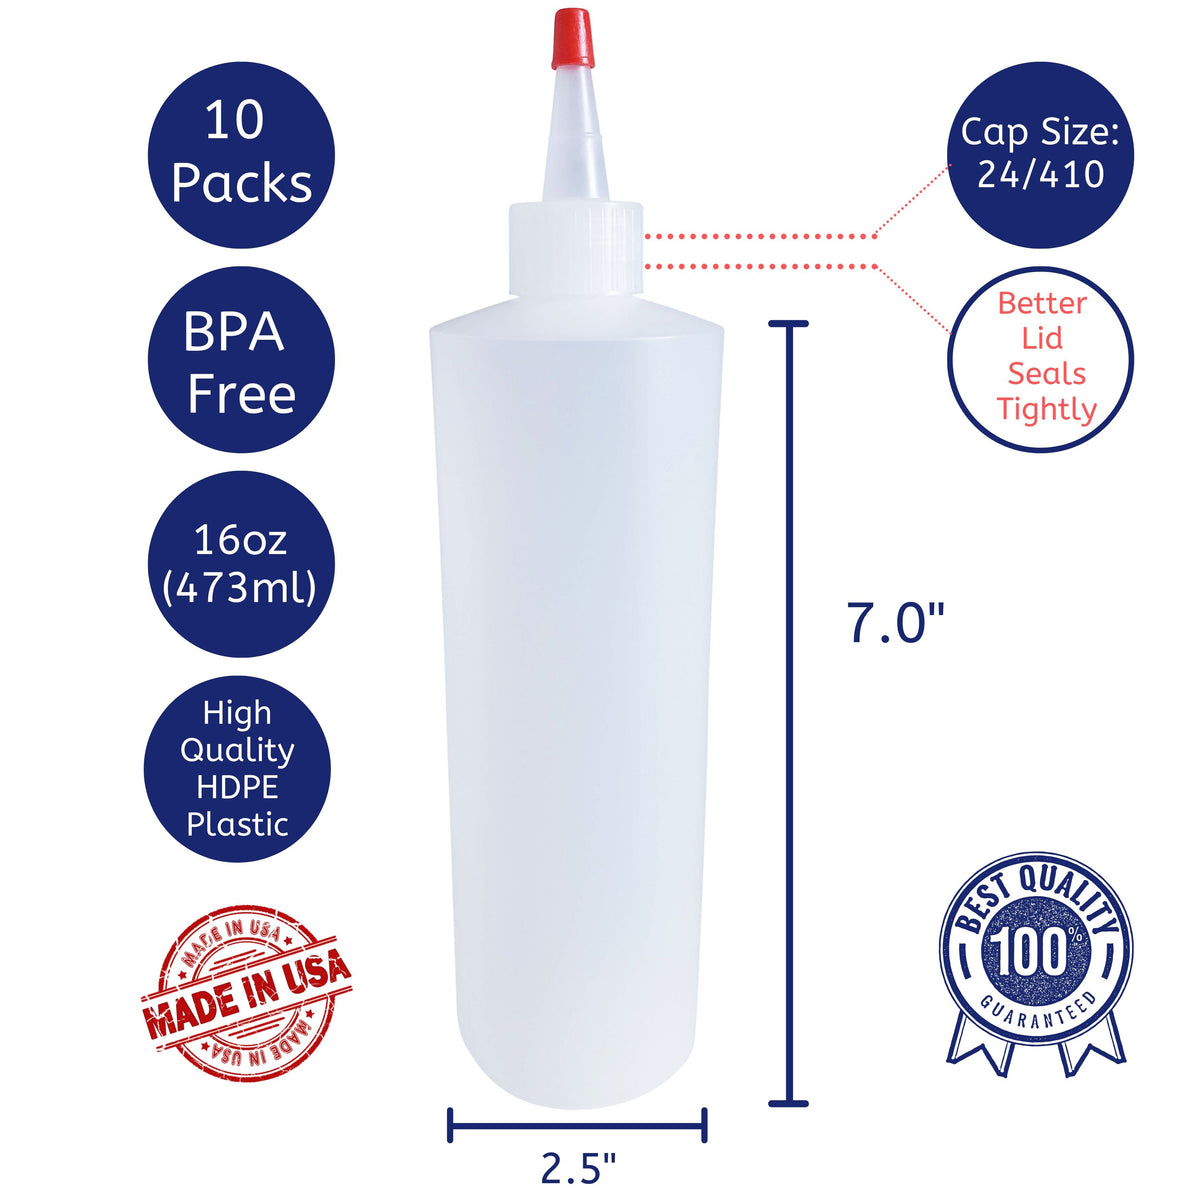 Youngever 16 Pack 2OZ HDPE Plastic Squeeze Bottles